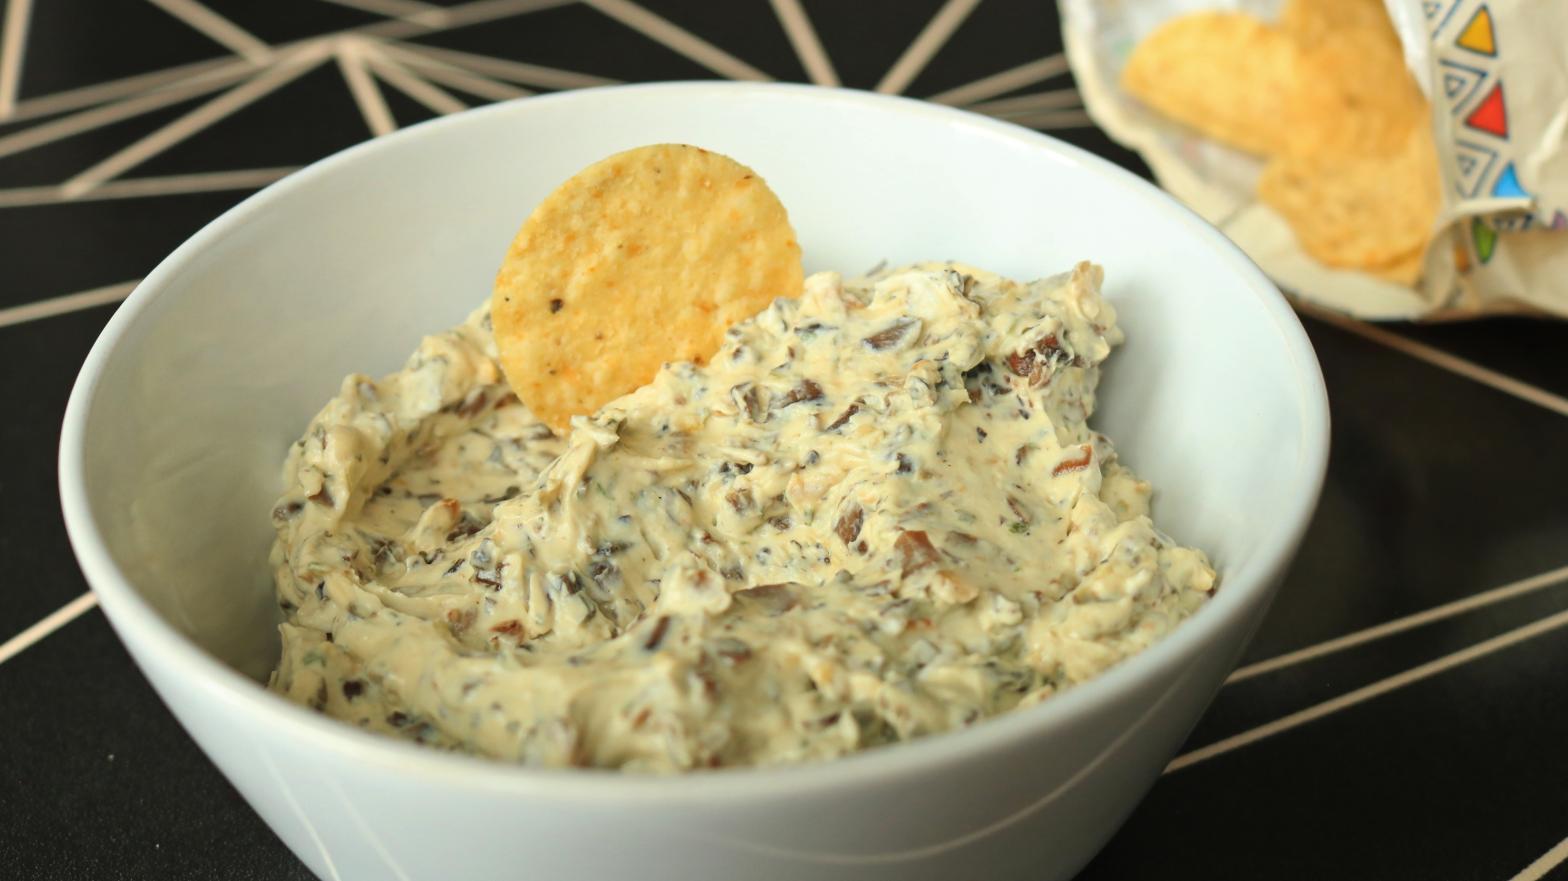 Make This Savory Mushroom-Onion Dip for Your Next Party